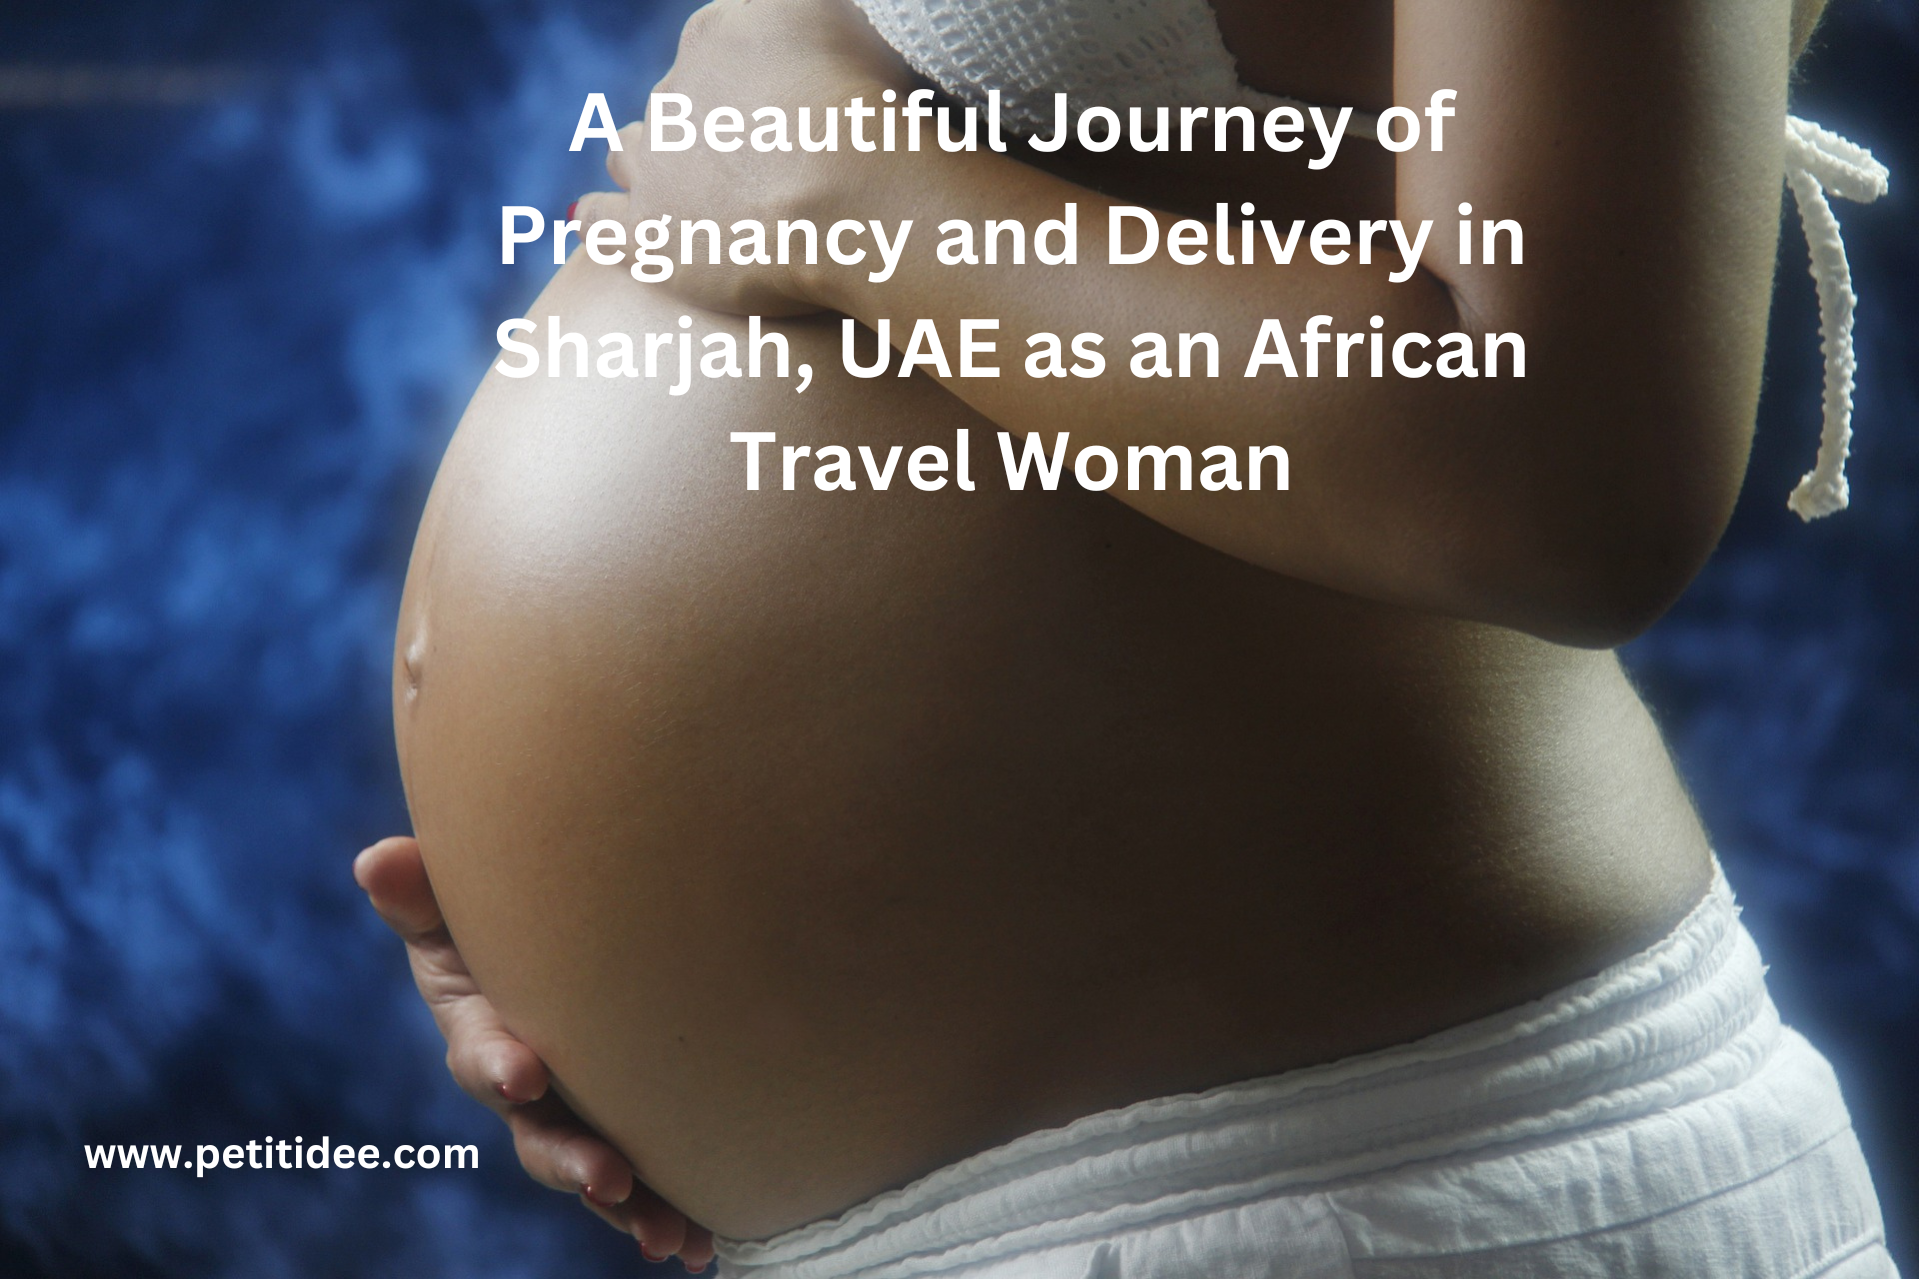 A Beautiful Journey of Pregnancy and Delivery in Sharjah, UAE as an African Travel Woman